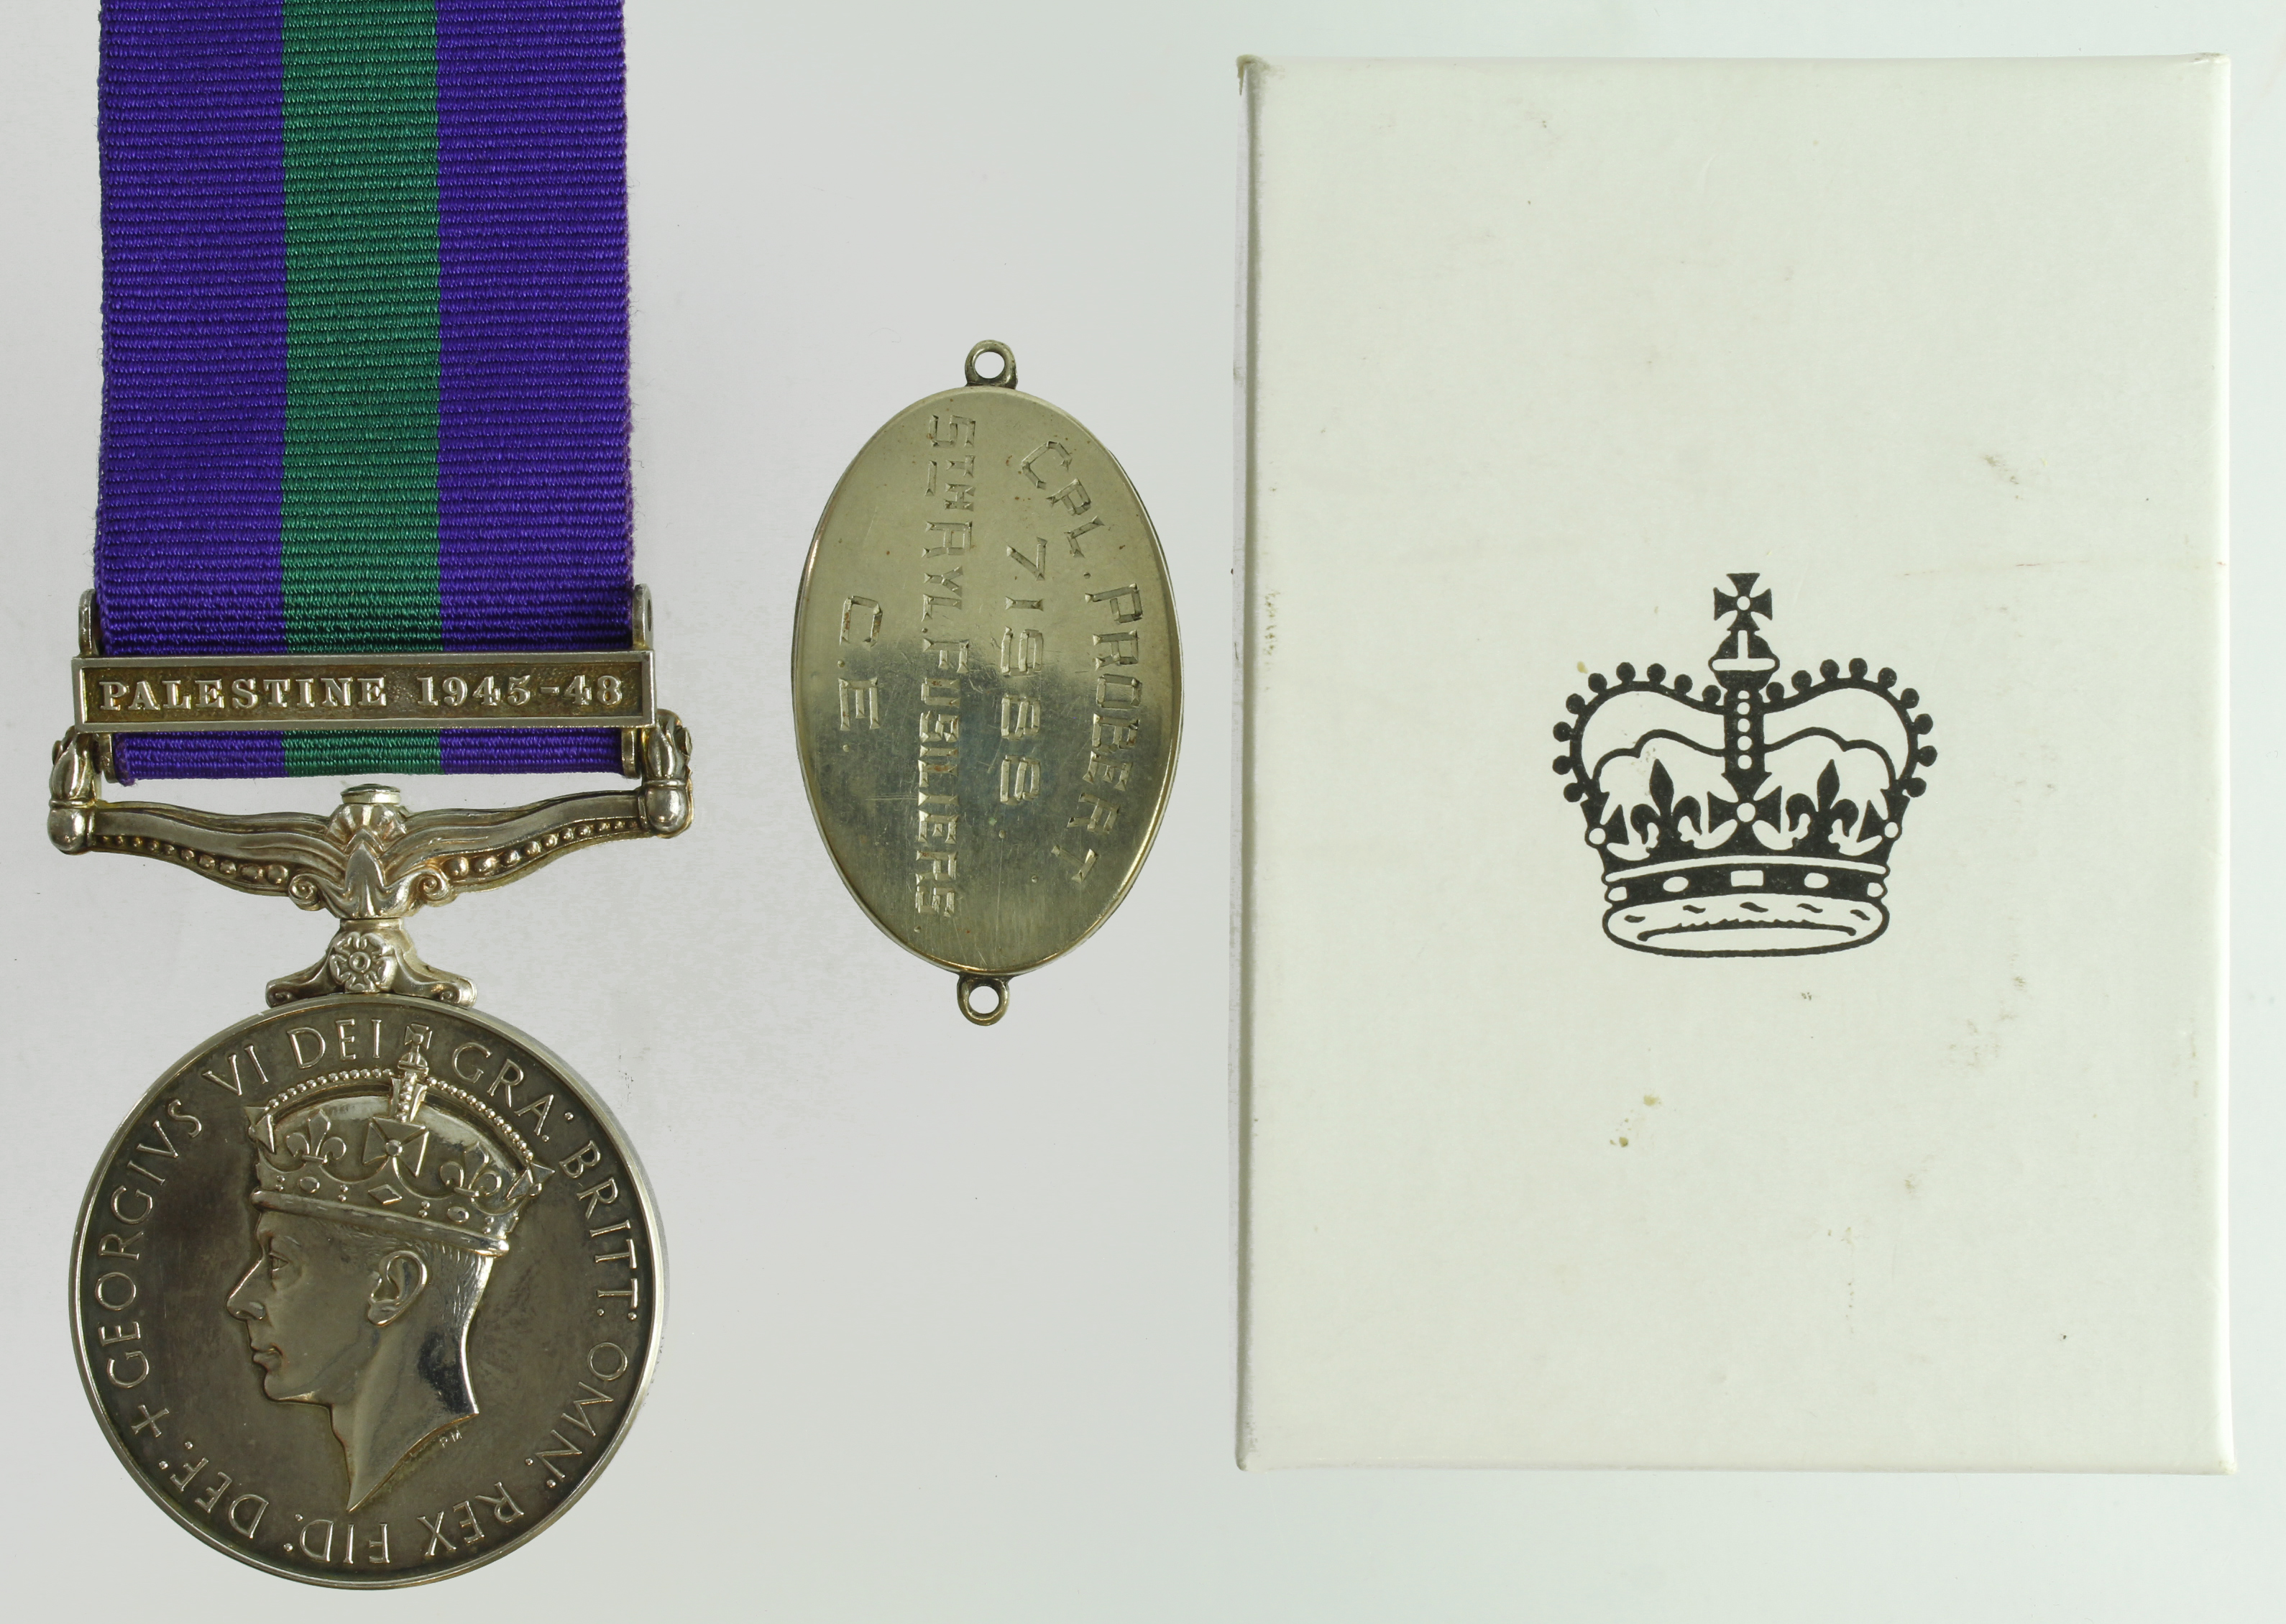 GSM GVI with Palestine 1945-48 clasp (19190956 Cfn B J Probert REME) with box of issue and an ID Tag